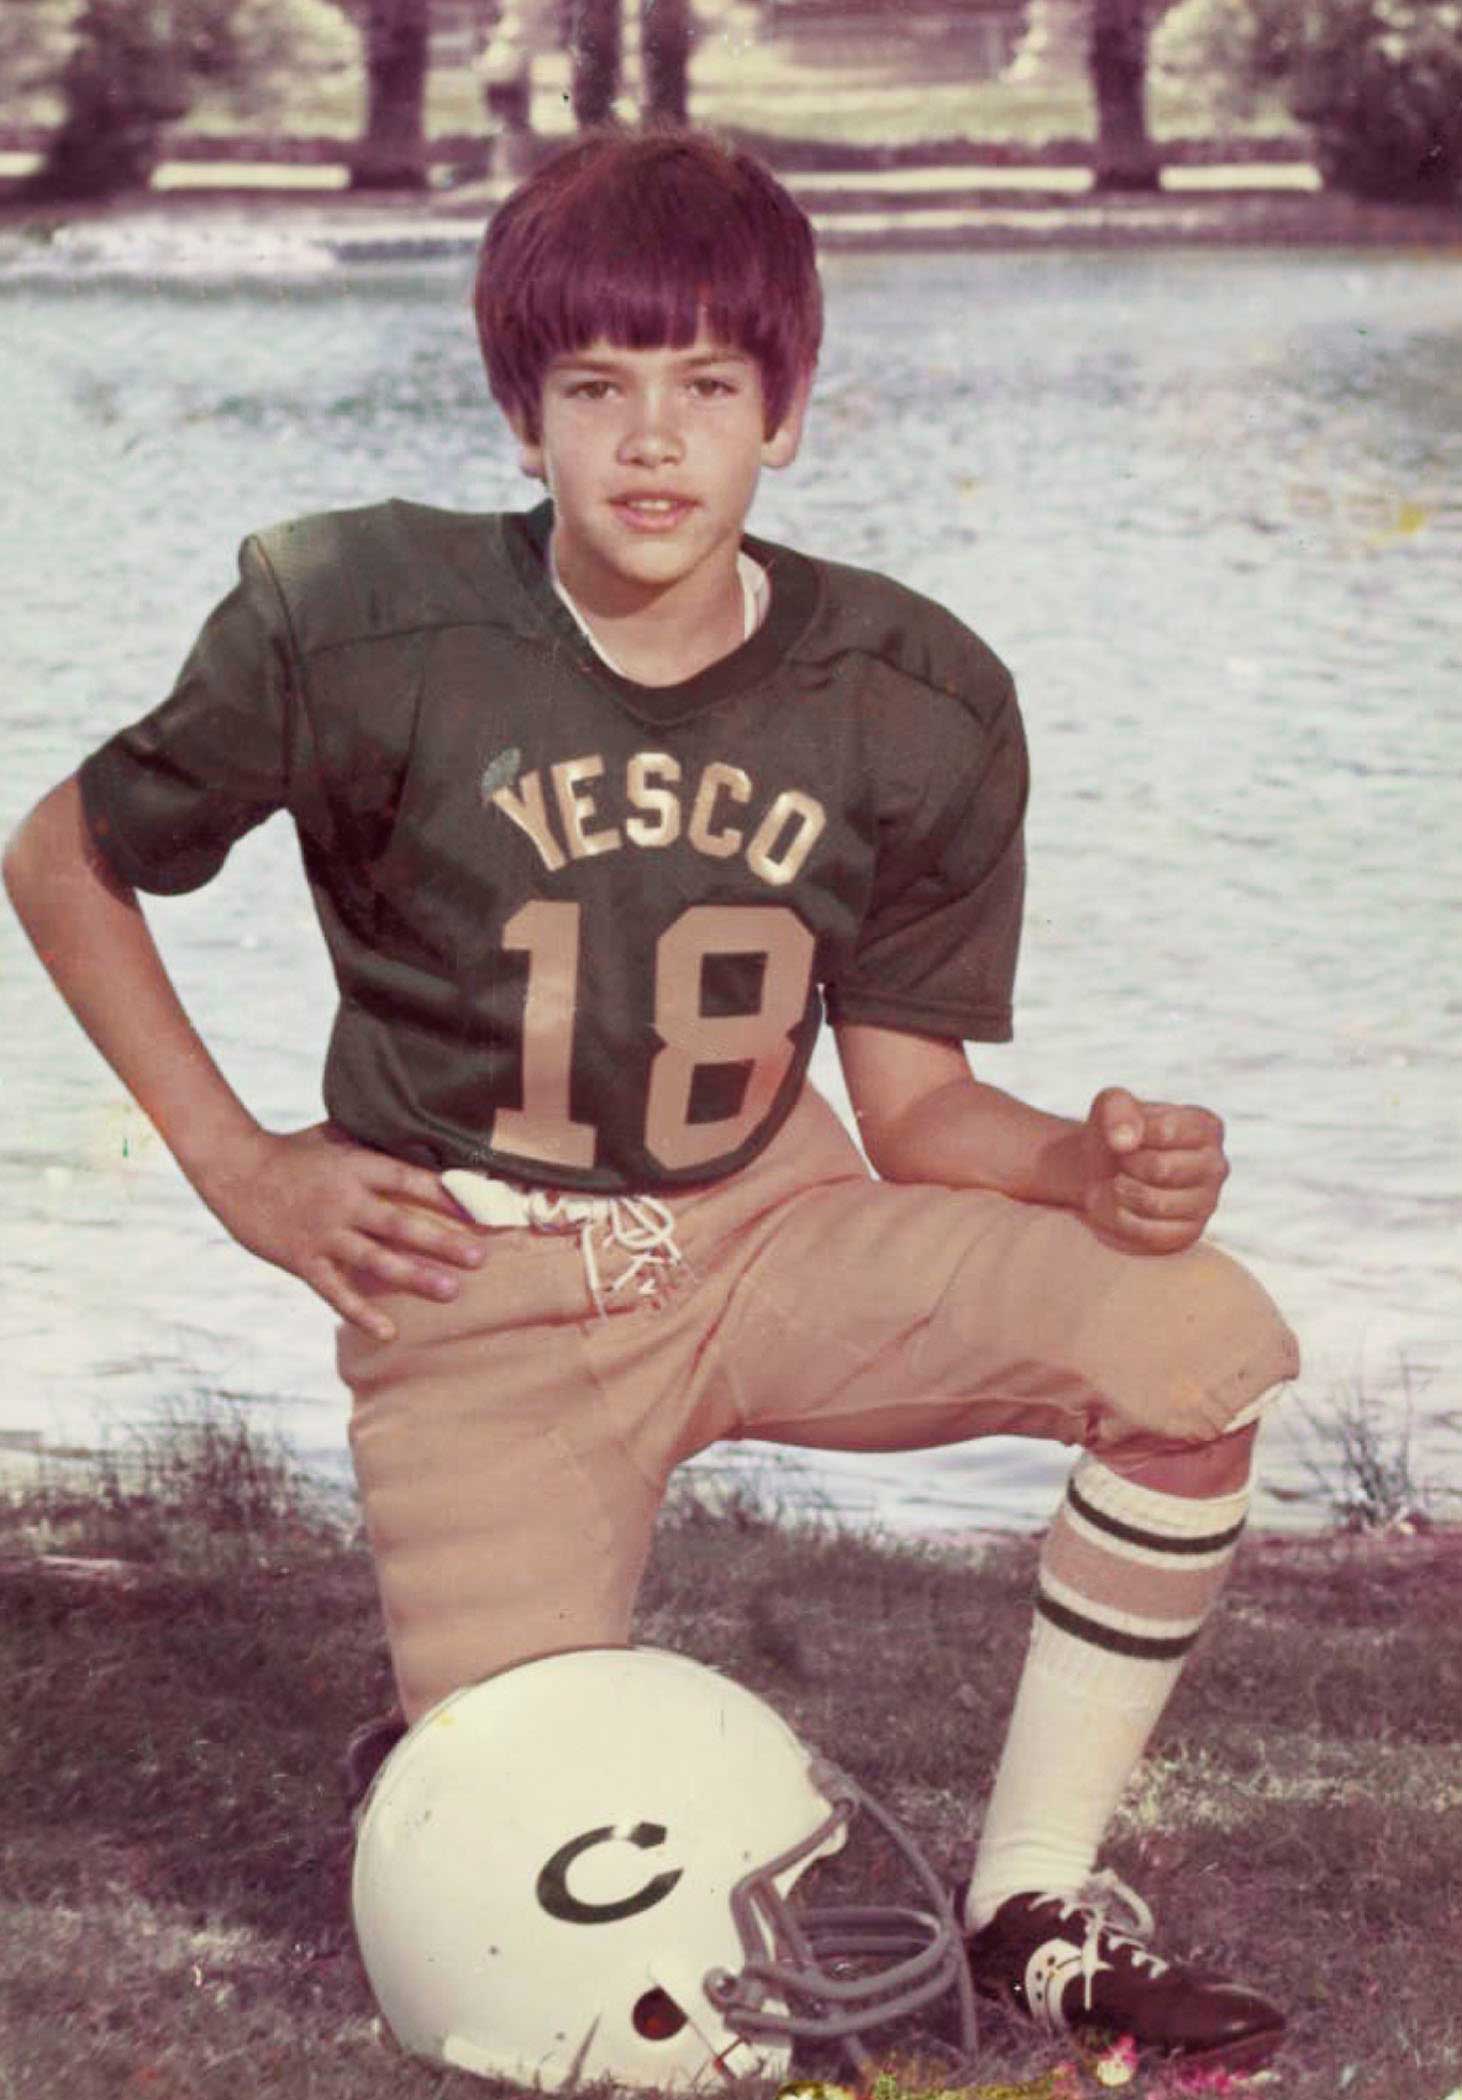 Marco Rubio during the Southern Nevada youth football conference, Yesco Cavaliers in Las Vegas, Nev., 1982